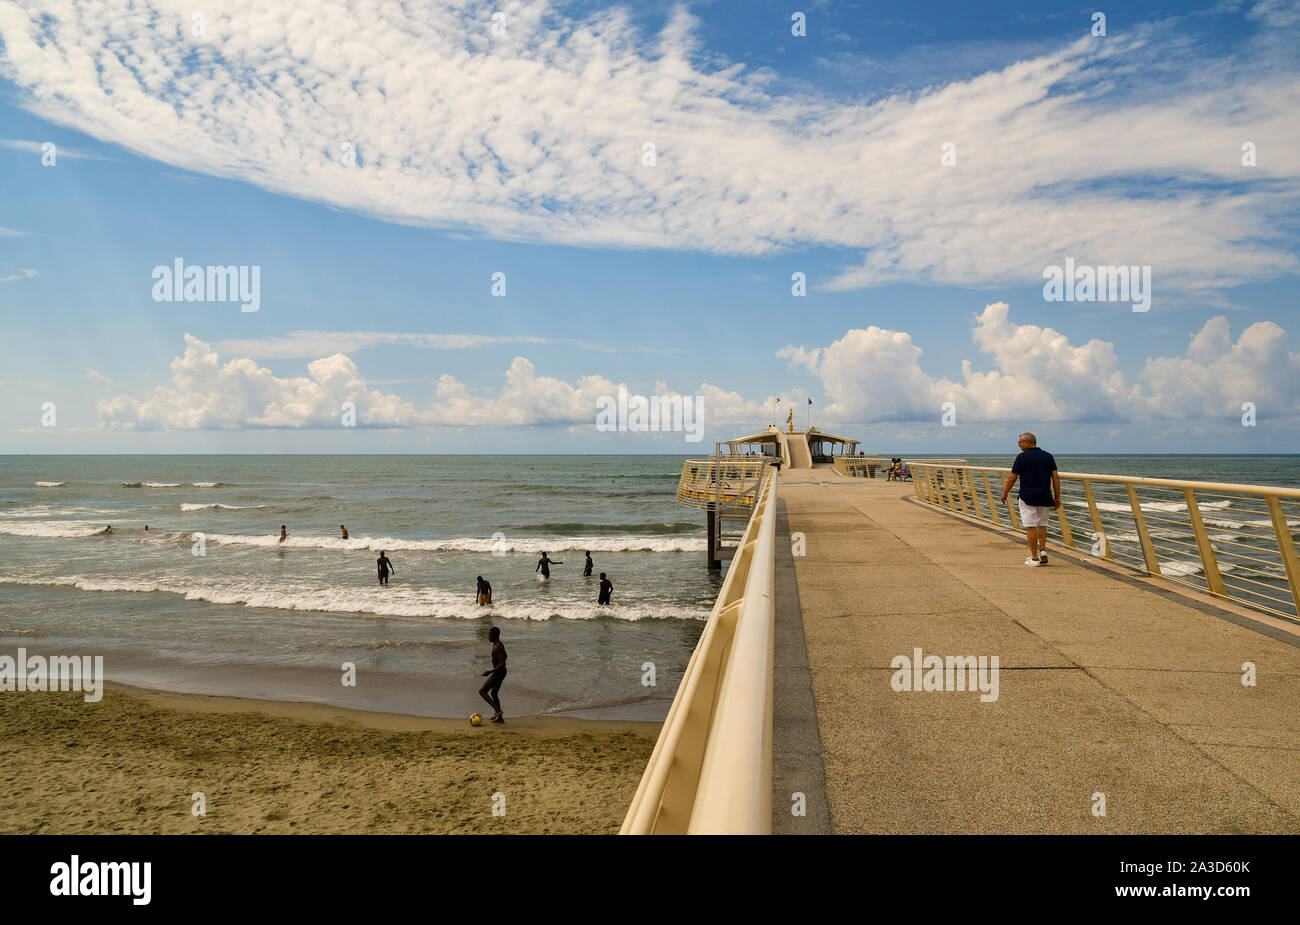 A group of African boys playing ball on the seashore near the modern pier of Lido di Camaiore in mid-August day Stock Photo